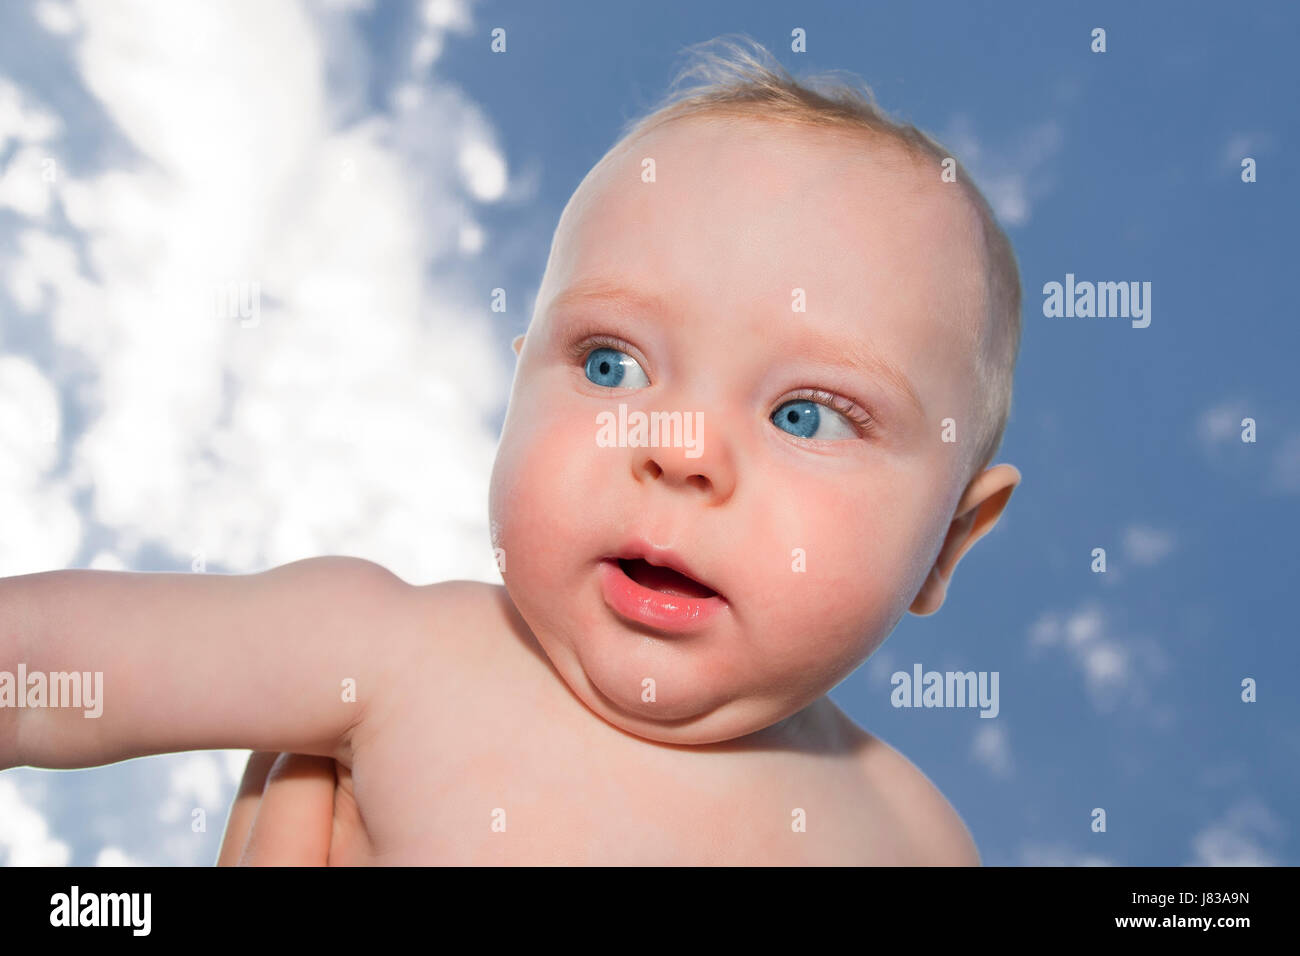 laugh laughs laughing twit giggle smile smiling laughter laughingly smilingly Stock Photo